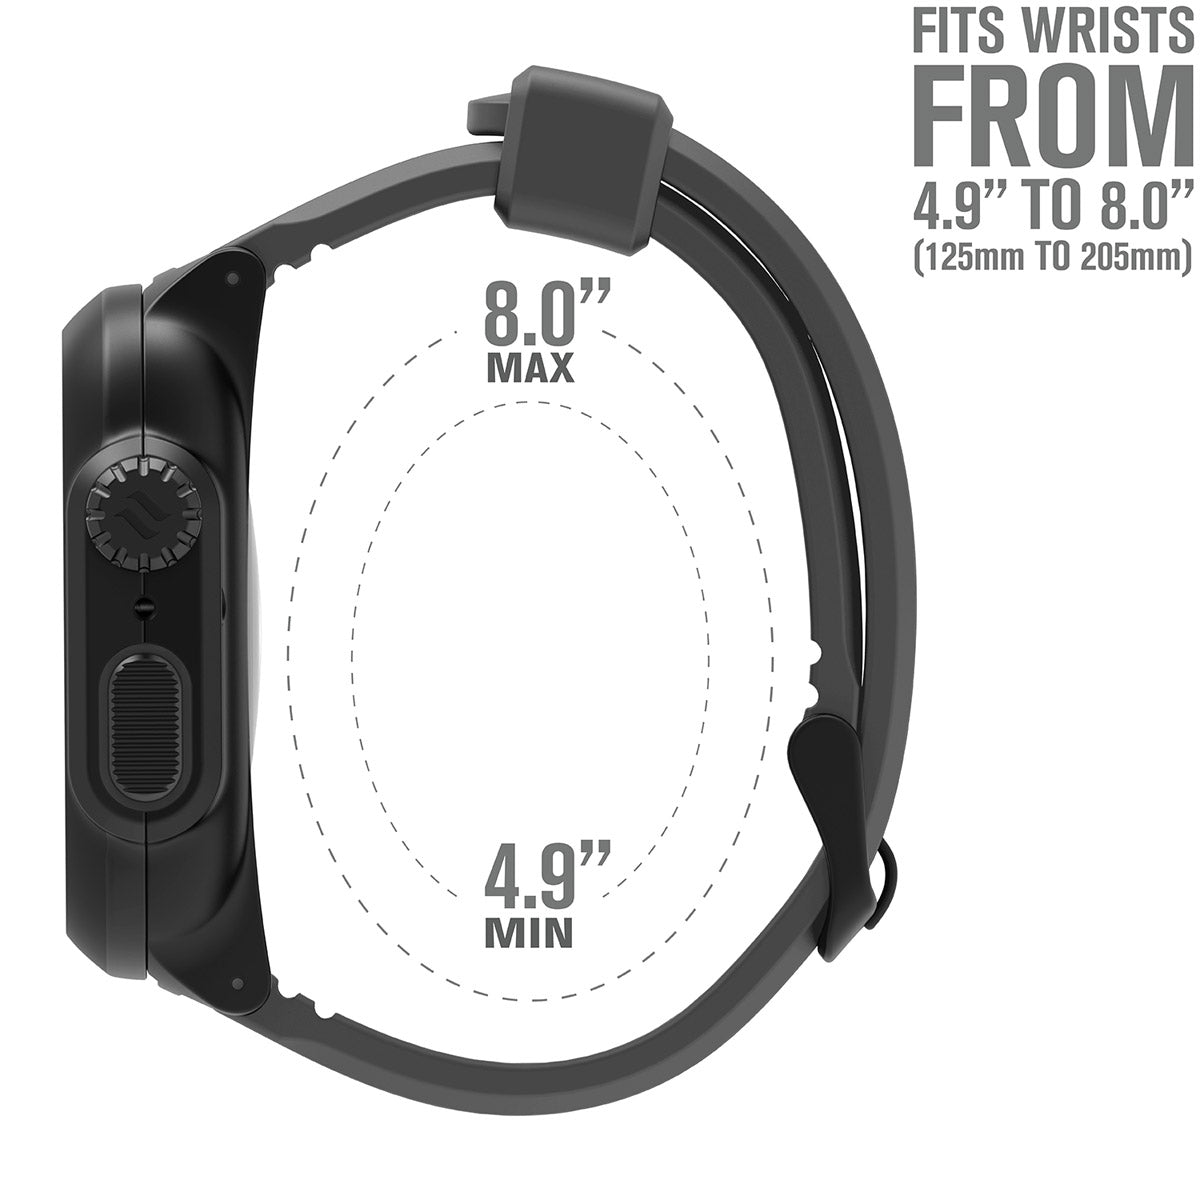 catalyst apple watch series 6 5 4 se gen 2 1 40mm 44mm waterproof case band black gray side of the case with the minimum and maximum sizes of the sport band text reads 8.0" max 4.9" min fits wrists from 4.9" to 8.0"(125mm to 205mm)